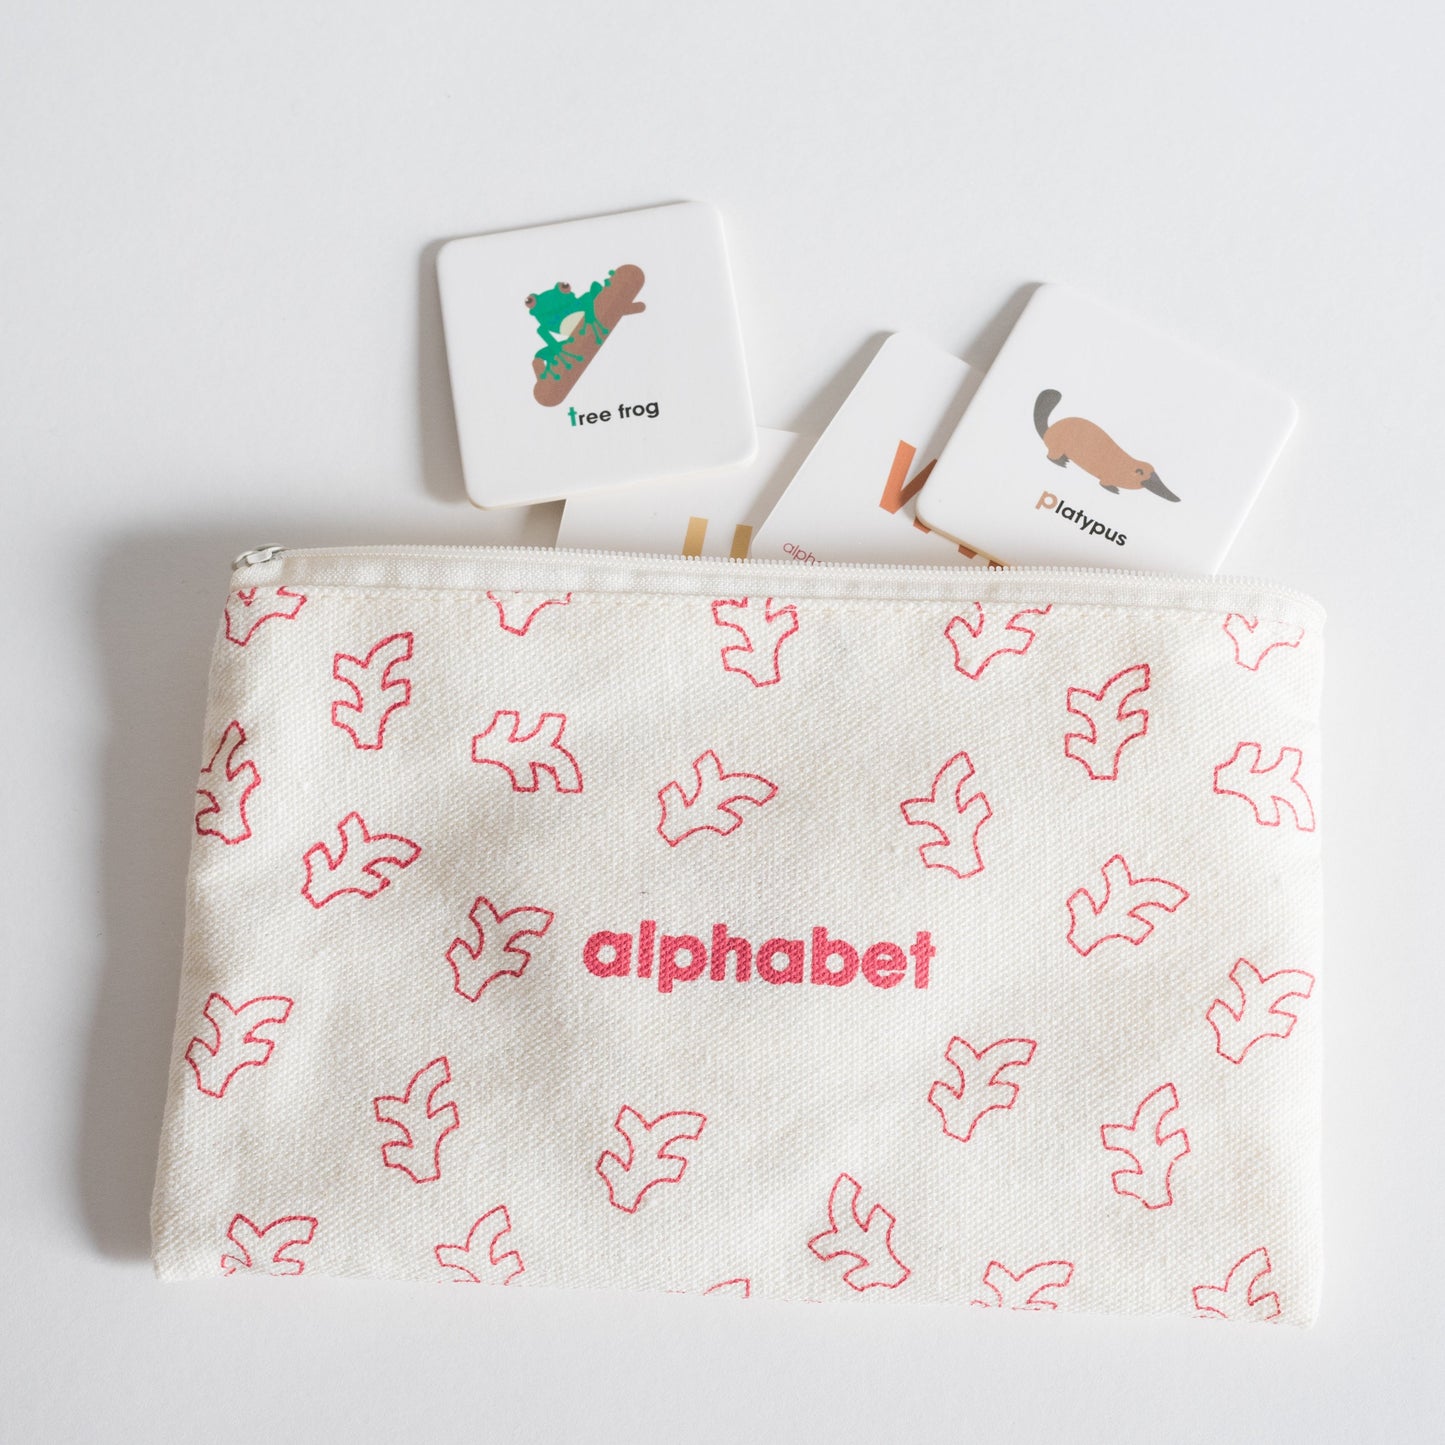 Cloth zippered Alphabet Tile Pack pouch on white background with four tiles spilling out